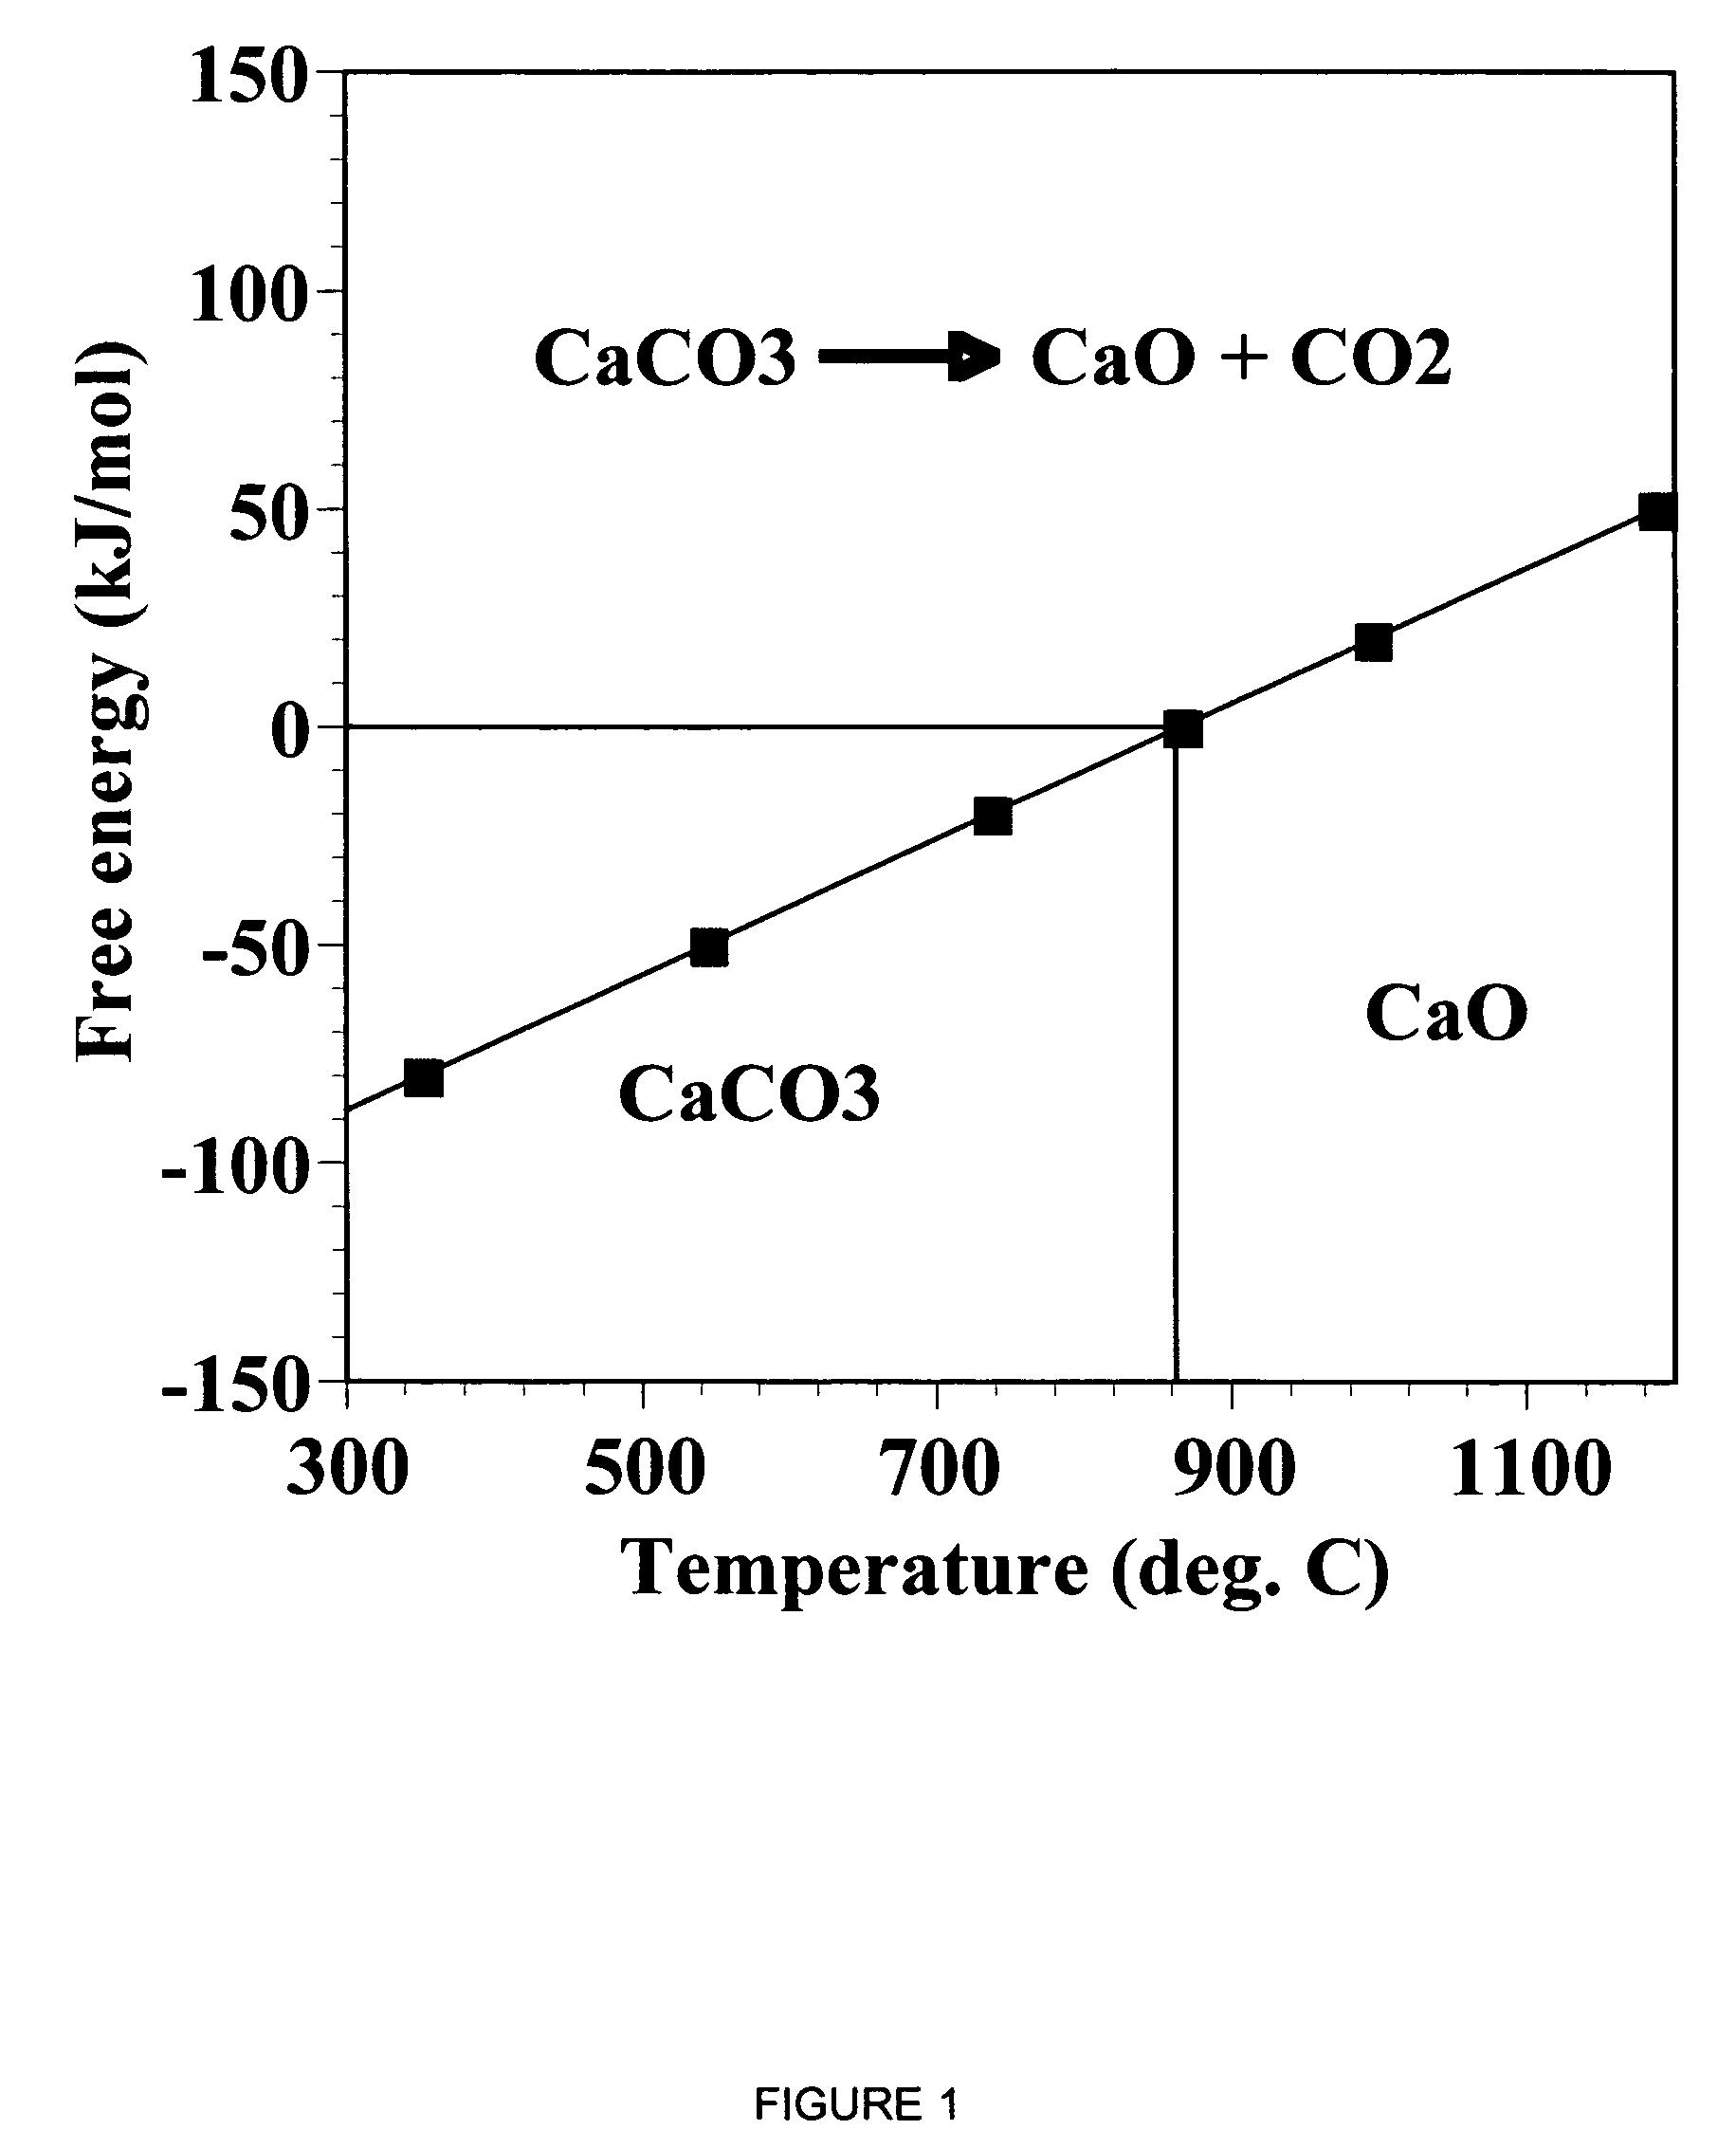 Separation of carbon dioxide (CO<sub>2</sub>) from gas mixtures